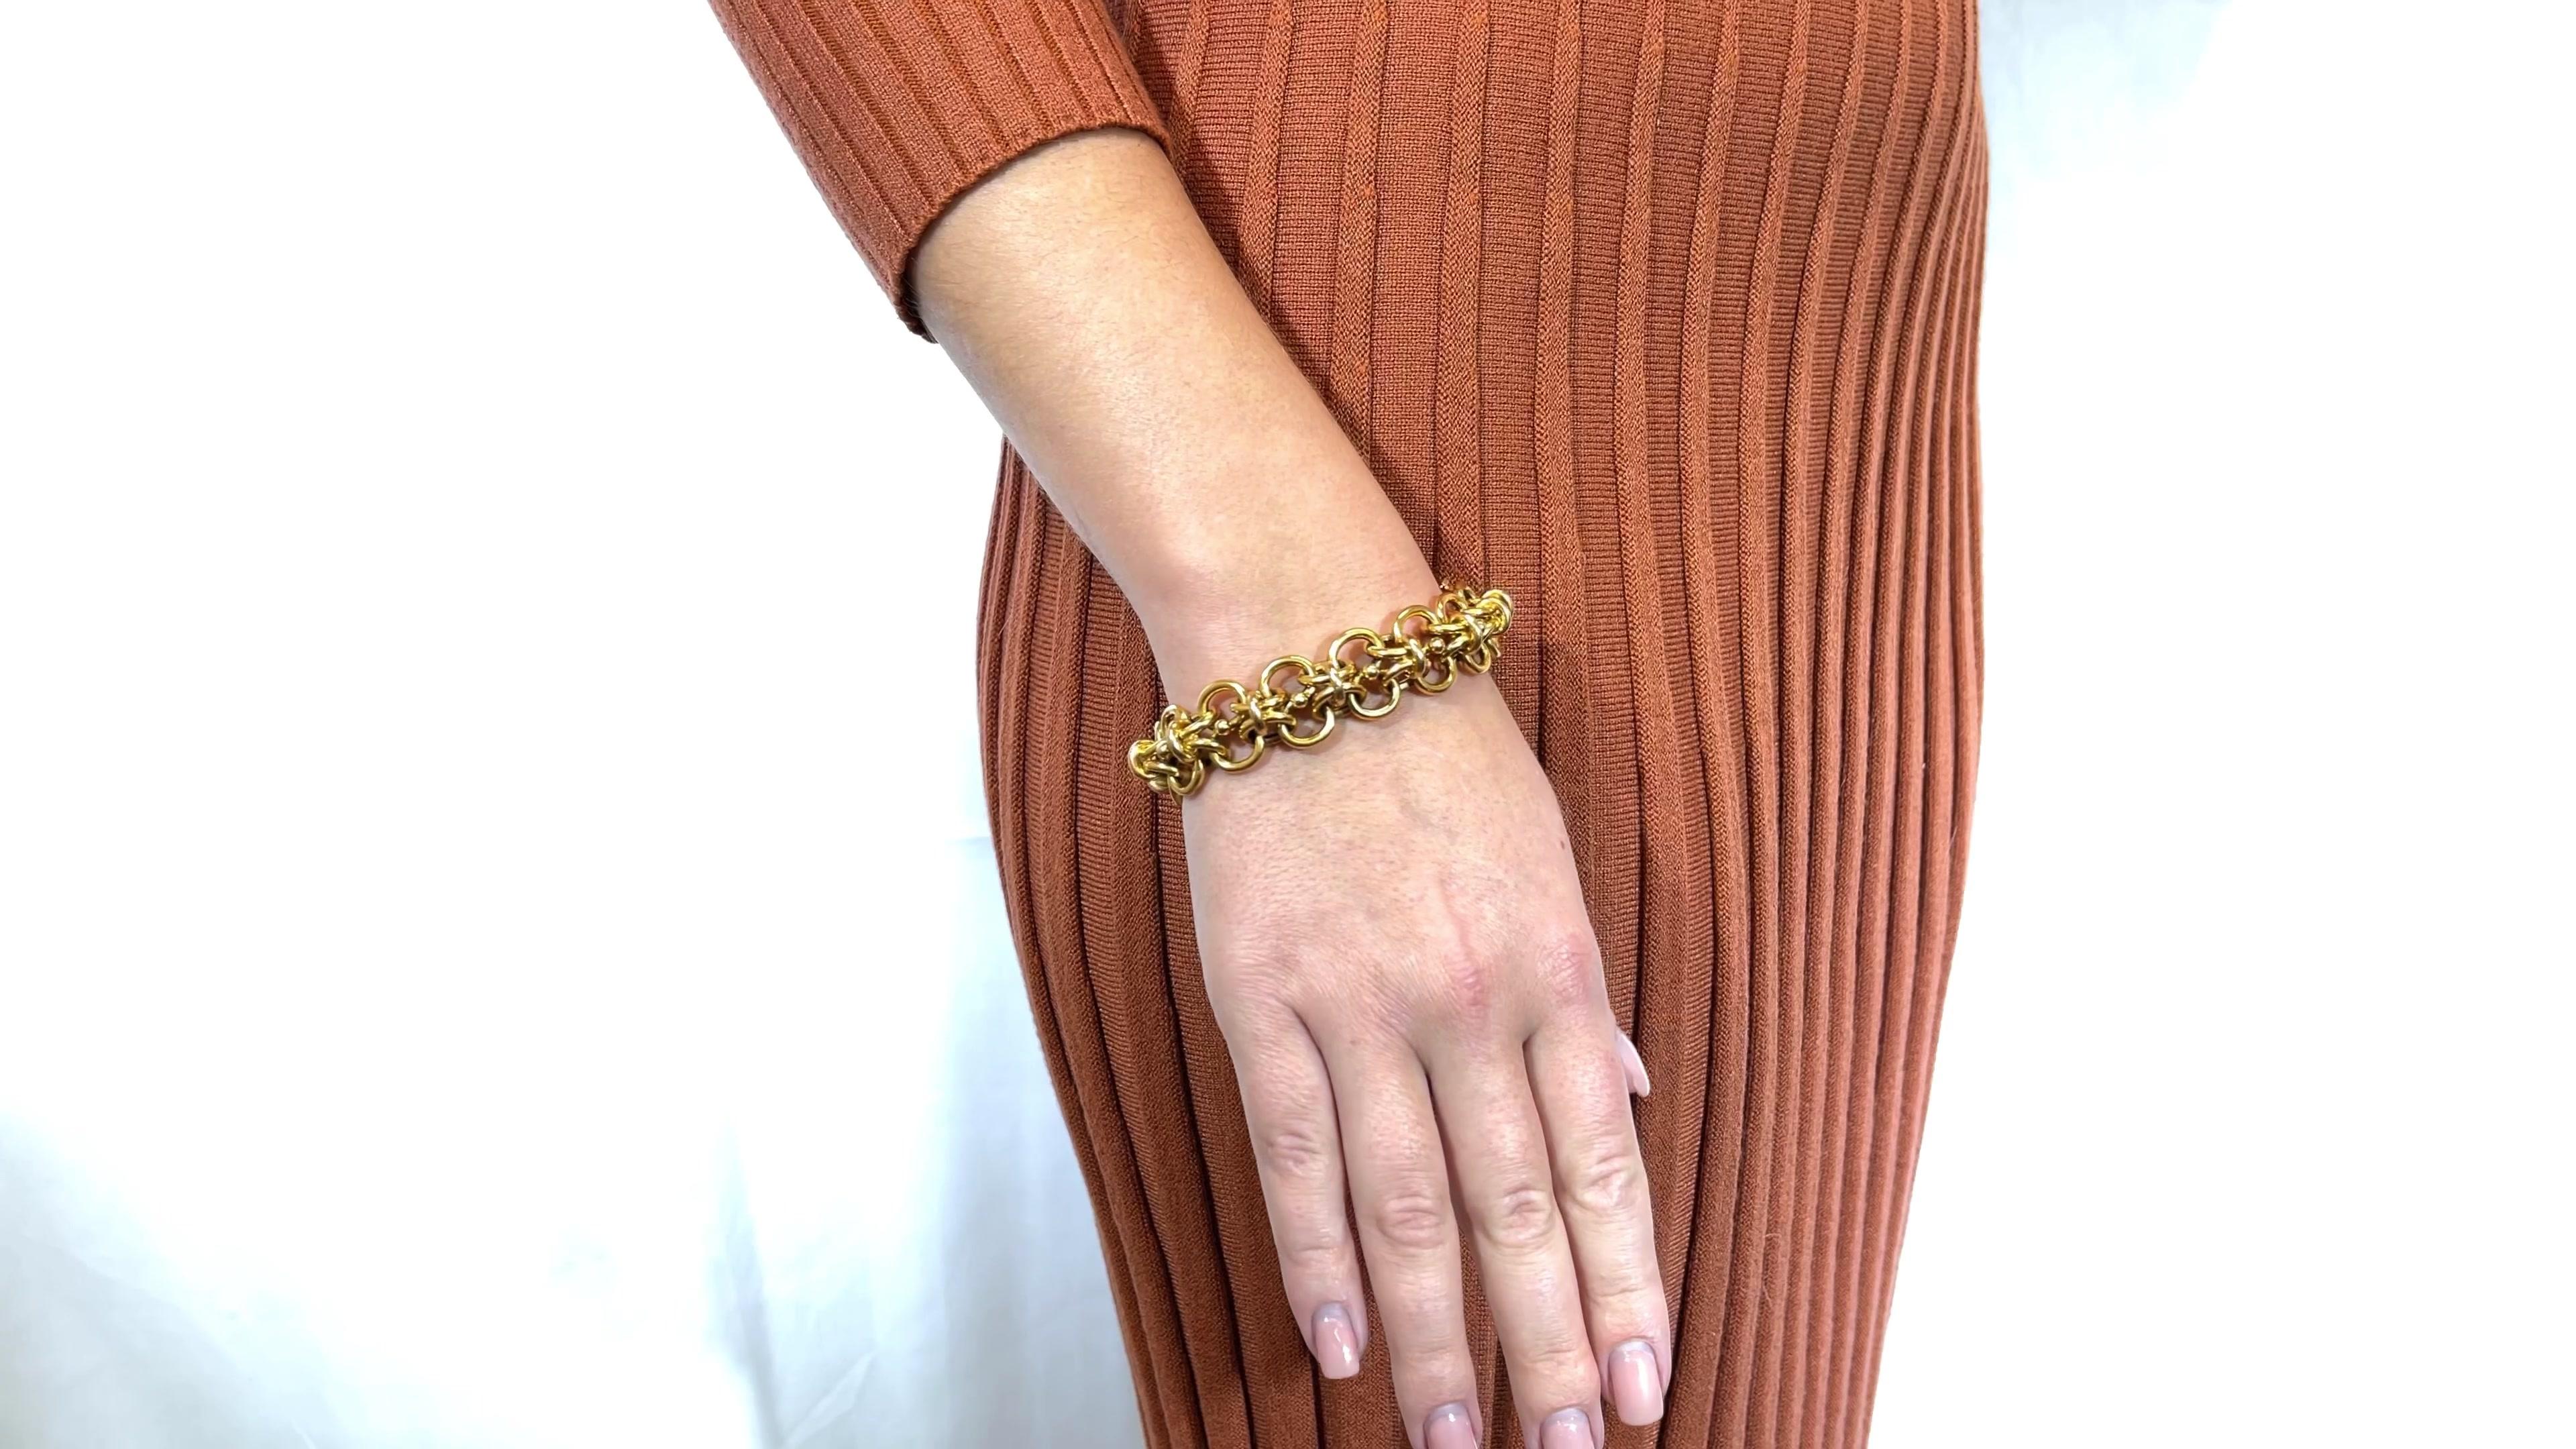 One Retro French 18k Gold Bracelet. Crafted in 18 karat yellow gold, weighing 39.77 grams, with French hallmarks and maker's mark. Circa 1940s. The bracelet is 7 1/2 inches. 

About The Piece: Own a historical piece of luxury. Bold solid gold links